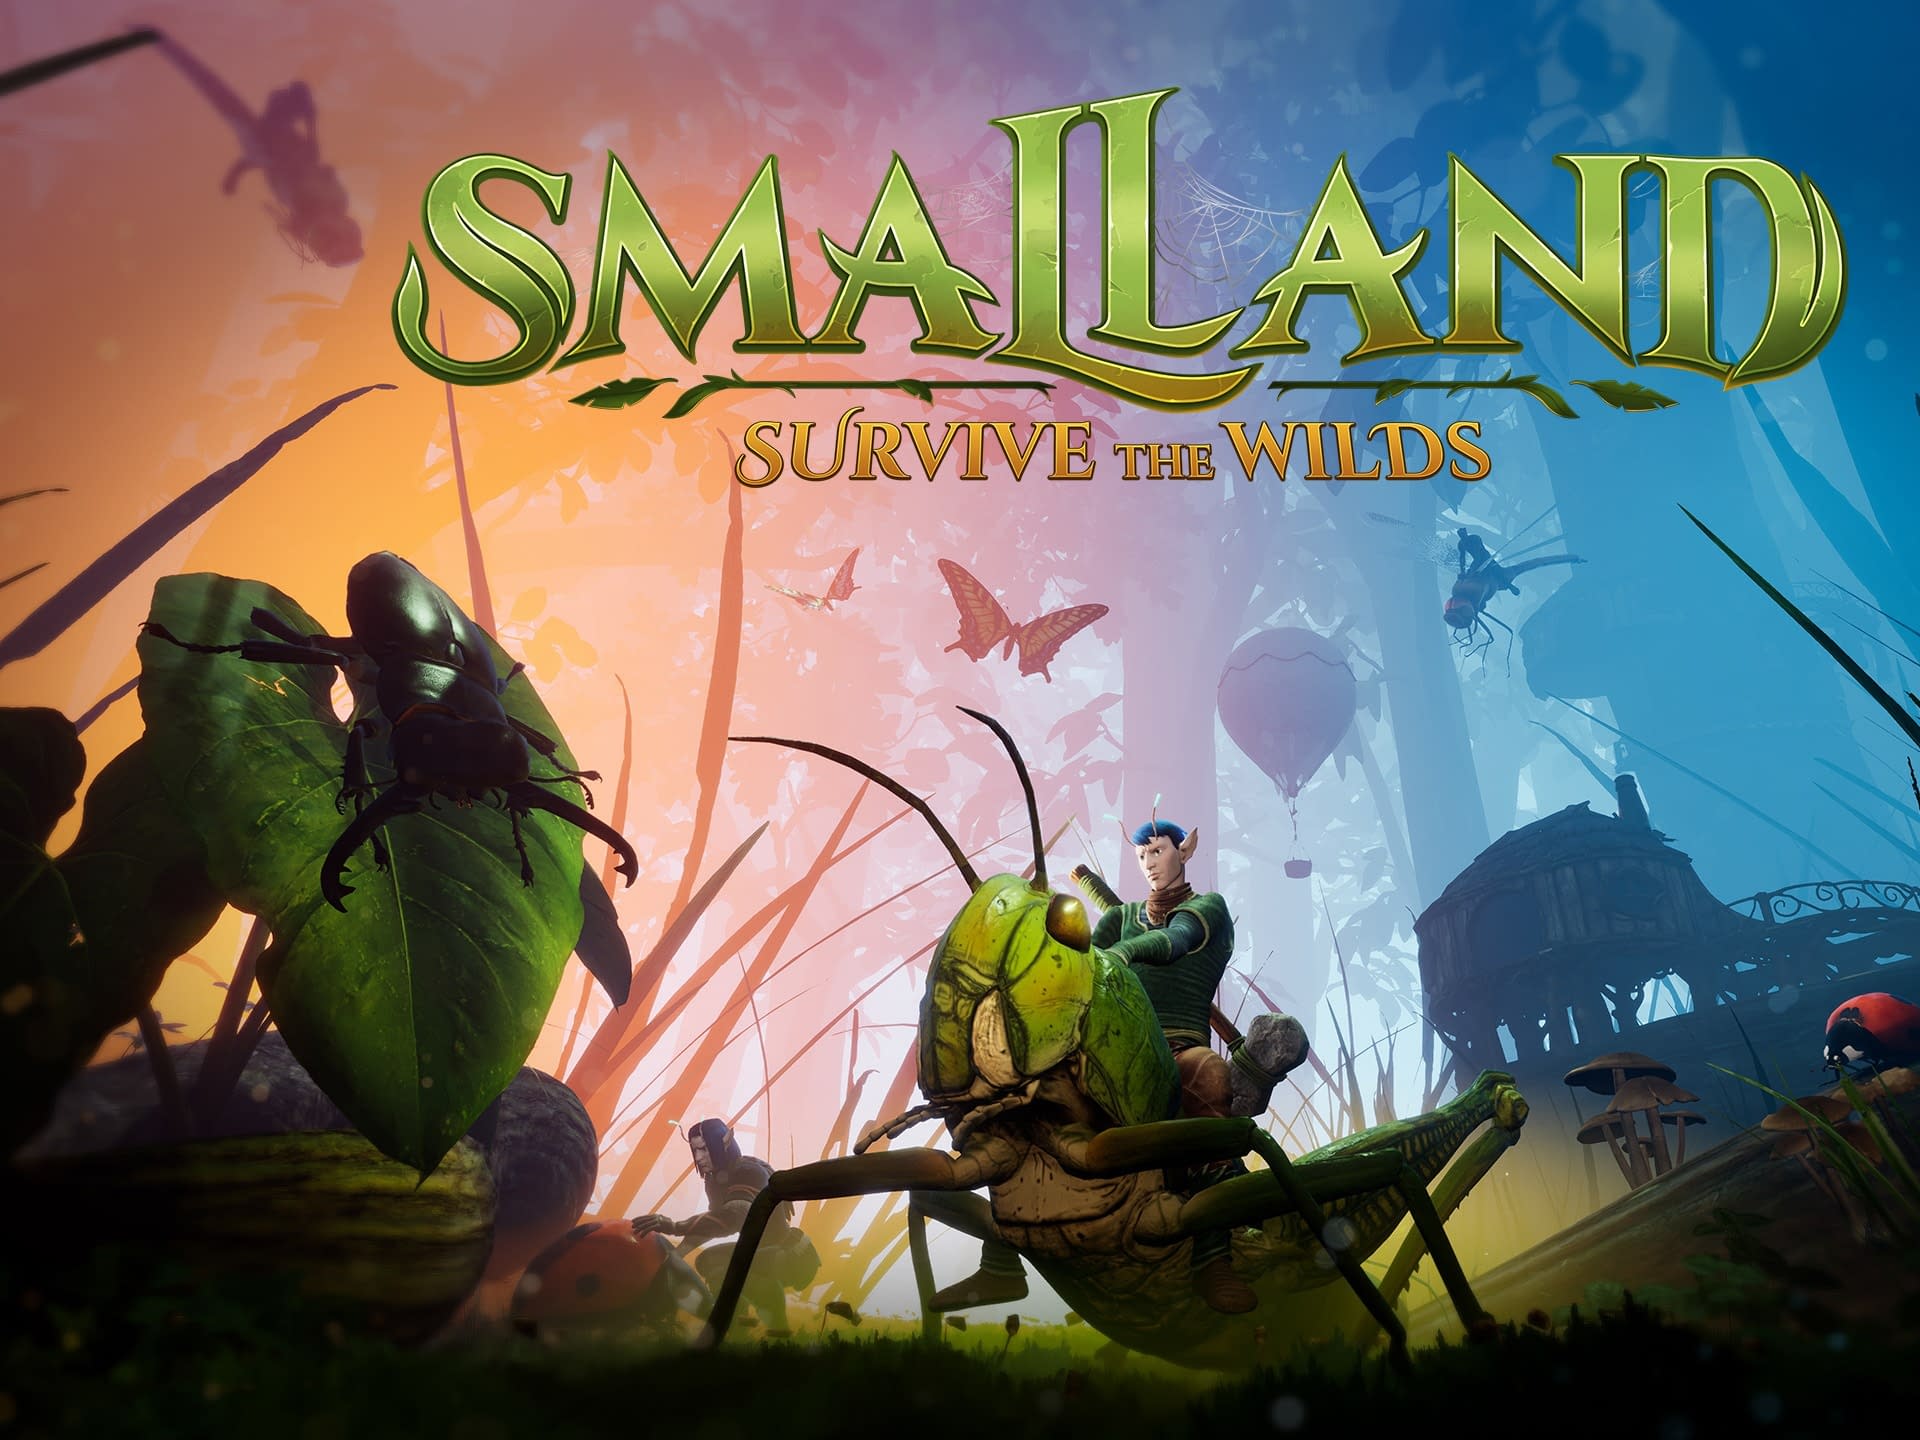 Smalland: Survive the Wilds Fights Full Version on December 7: Here Details